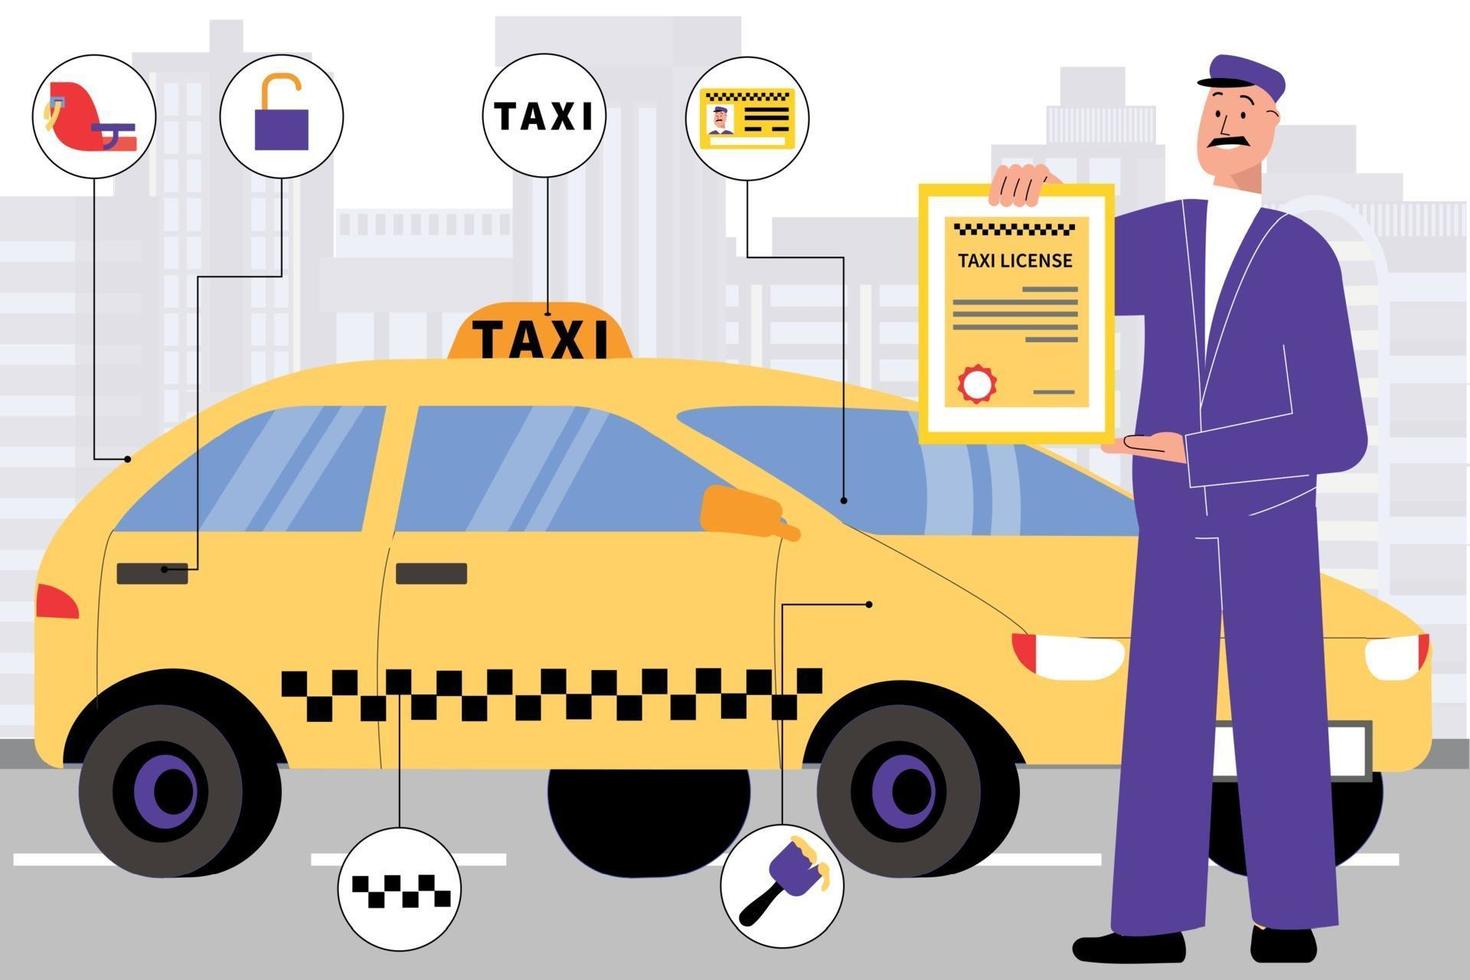 Taxi License Flat Composition vector